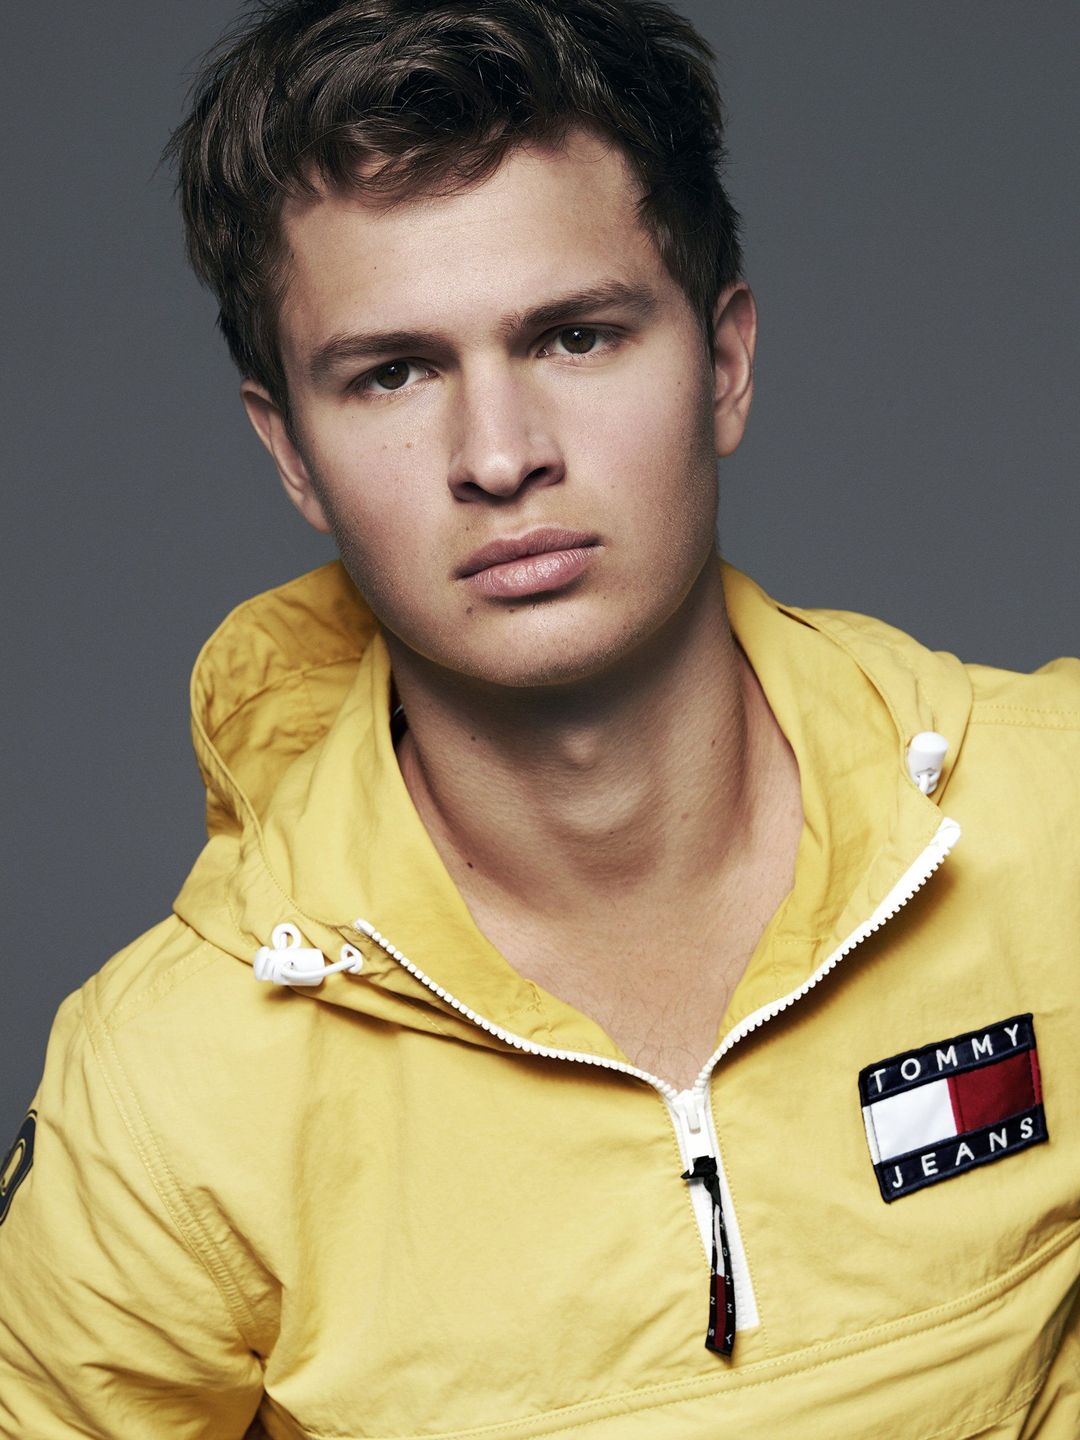 Ansel Elgort who is his father